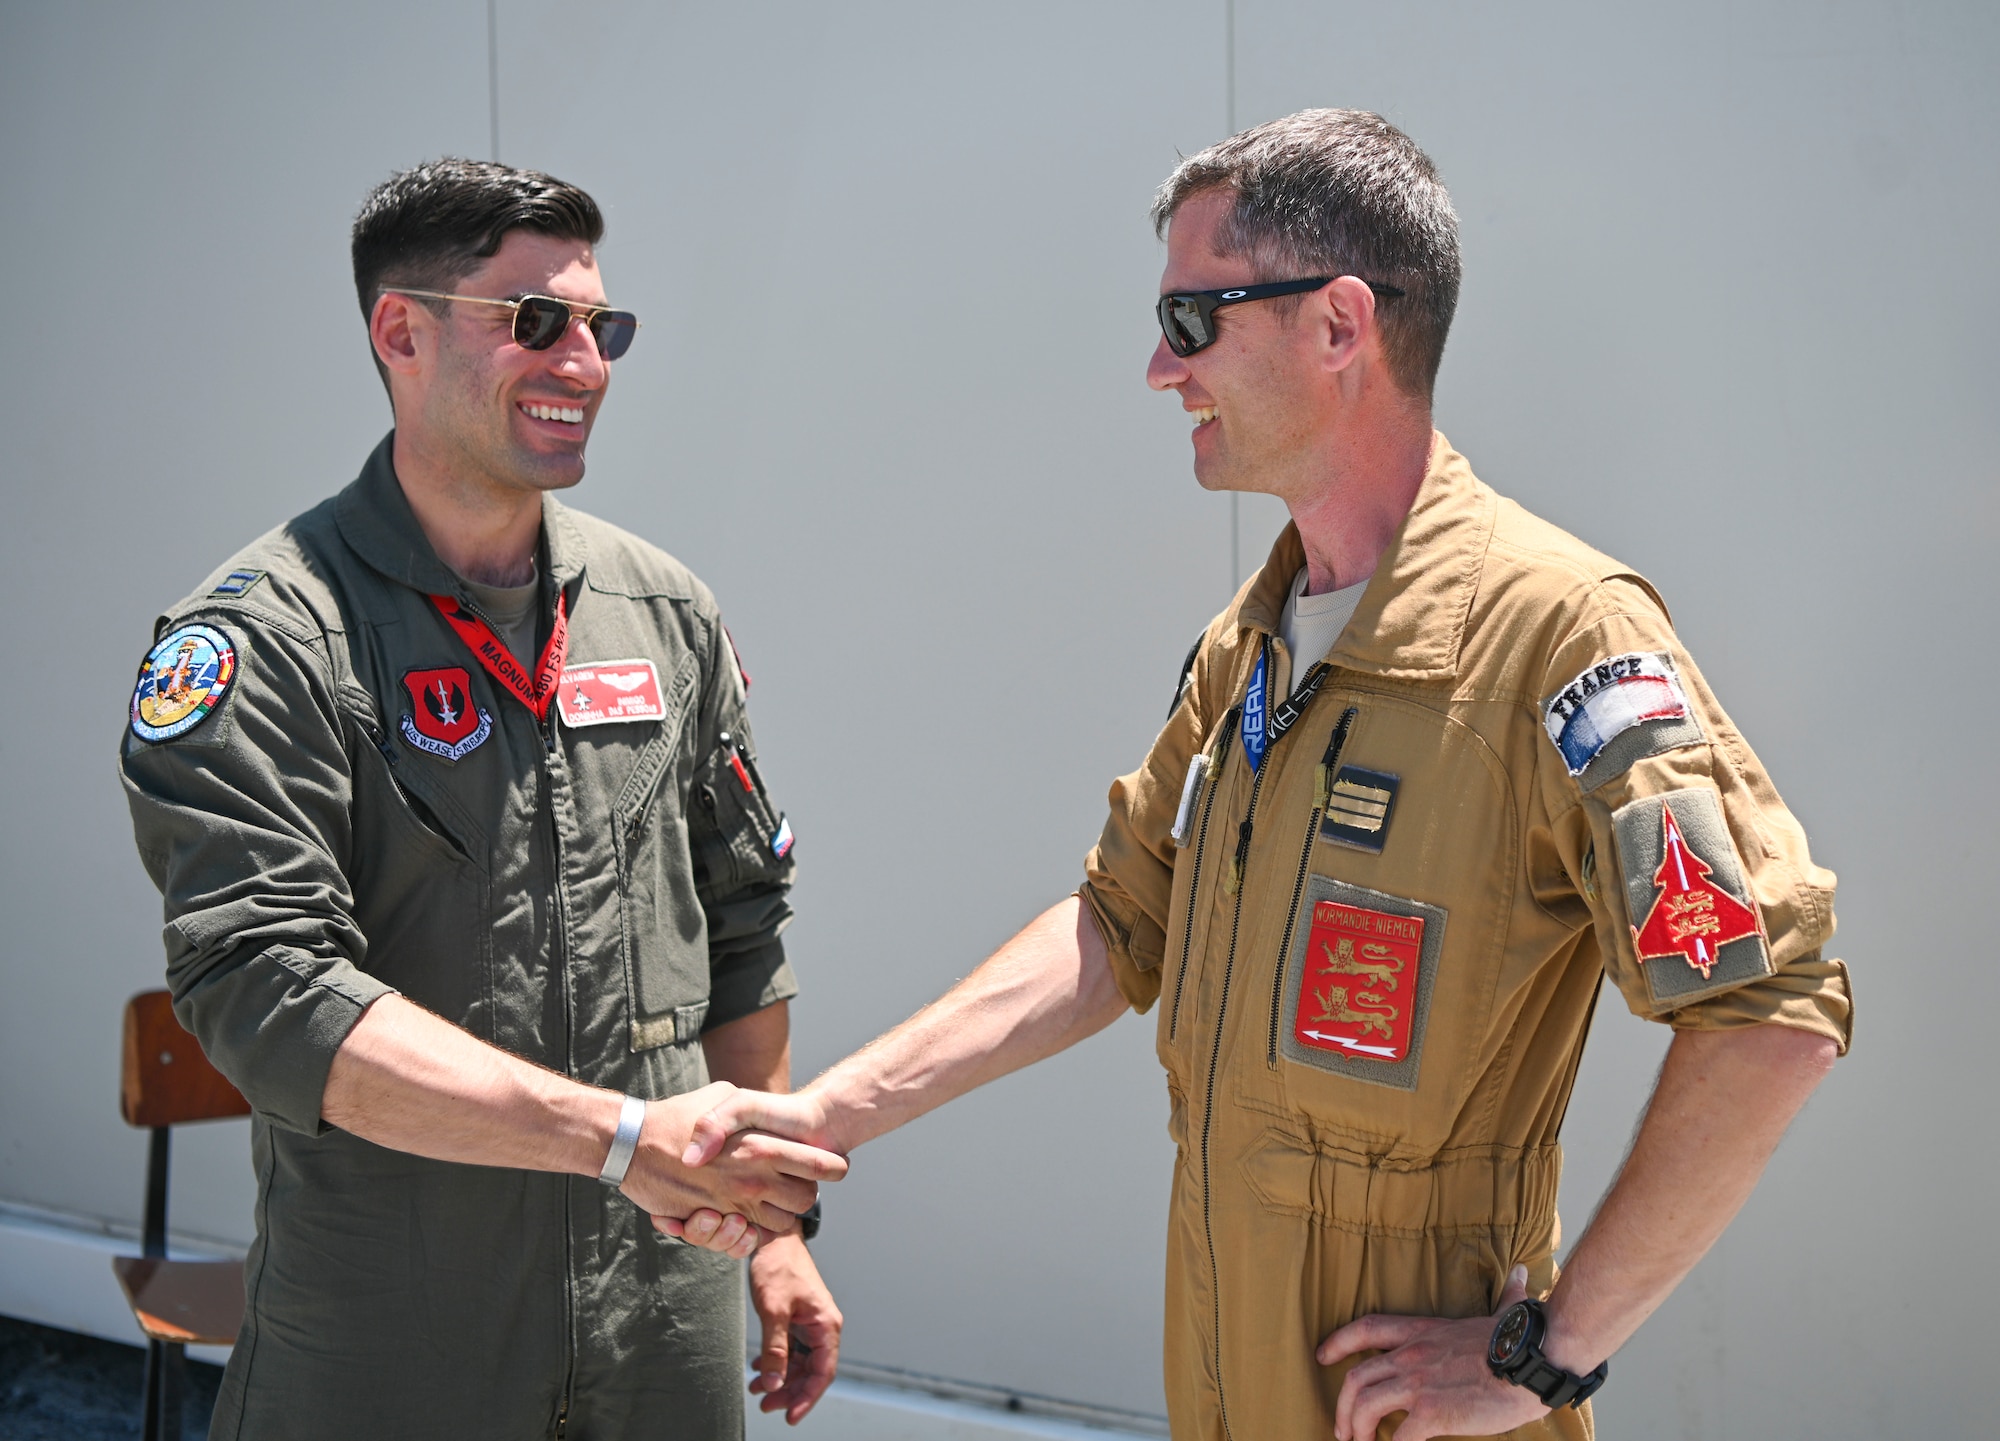 U.S. Air Force Capt. Domenick Stumpi, 480th Fighter Squadron pilot (left), stationed at Spangdahlem Air Base, Germany, shakes hands with Capt. Bibi, a French air force pilot assigned to the 2/30 Normandie Niemen Squadron at Exercise Real Thaw 22 on Beja Air Base, Portugal, July 6, 2022. Real Thaw is a Portuguese air force-led, multilateral training exercise aimed to strengthen the interoperability and skills of NATO Allies and Partners.  (U.S. Air Force photo by Tech. Sgt. Warren D. Spearman Jr.)